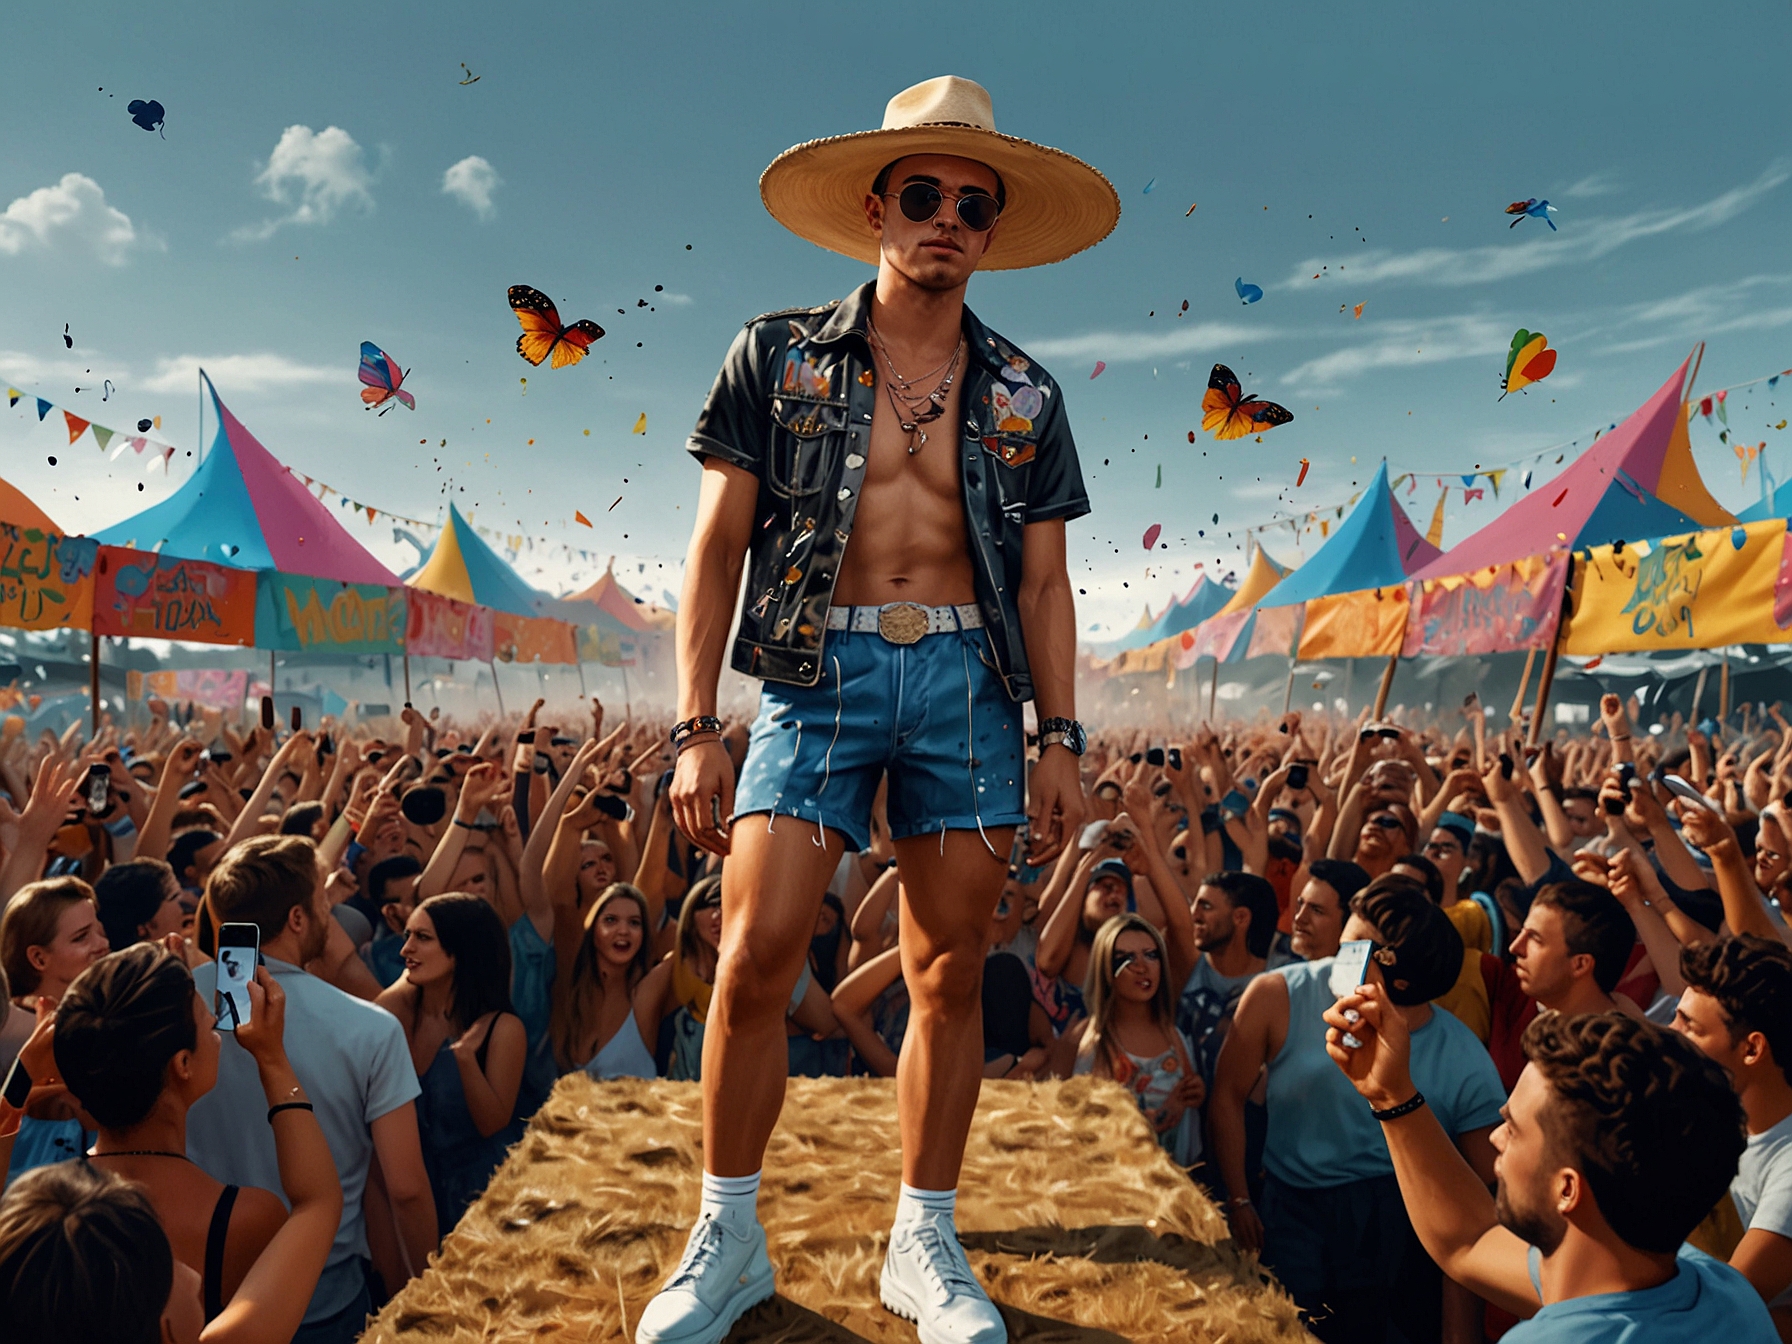 Paul Mescal makes a fashion statement at Glastonbury 2024, reviving his iconic tiny shorts and inspiring festival attendees amidst electrifying performances by headliners like Dua Lipa and Coldplay.